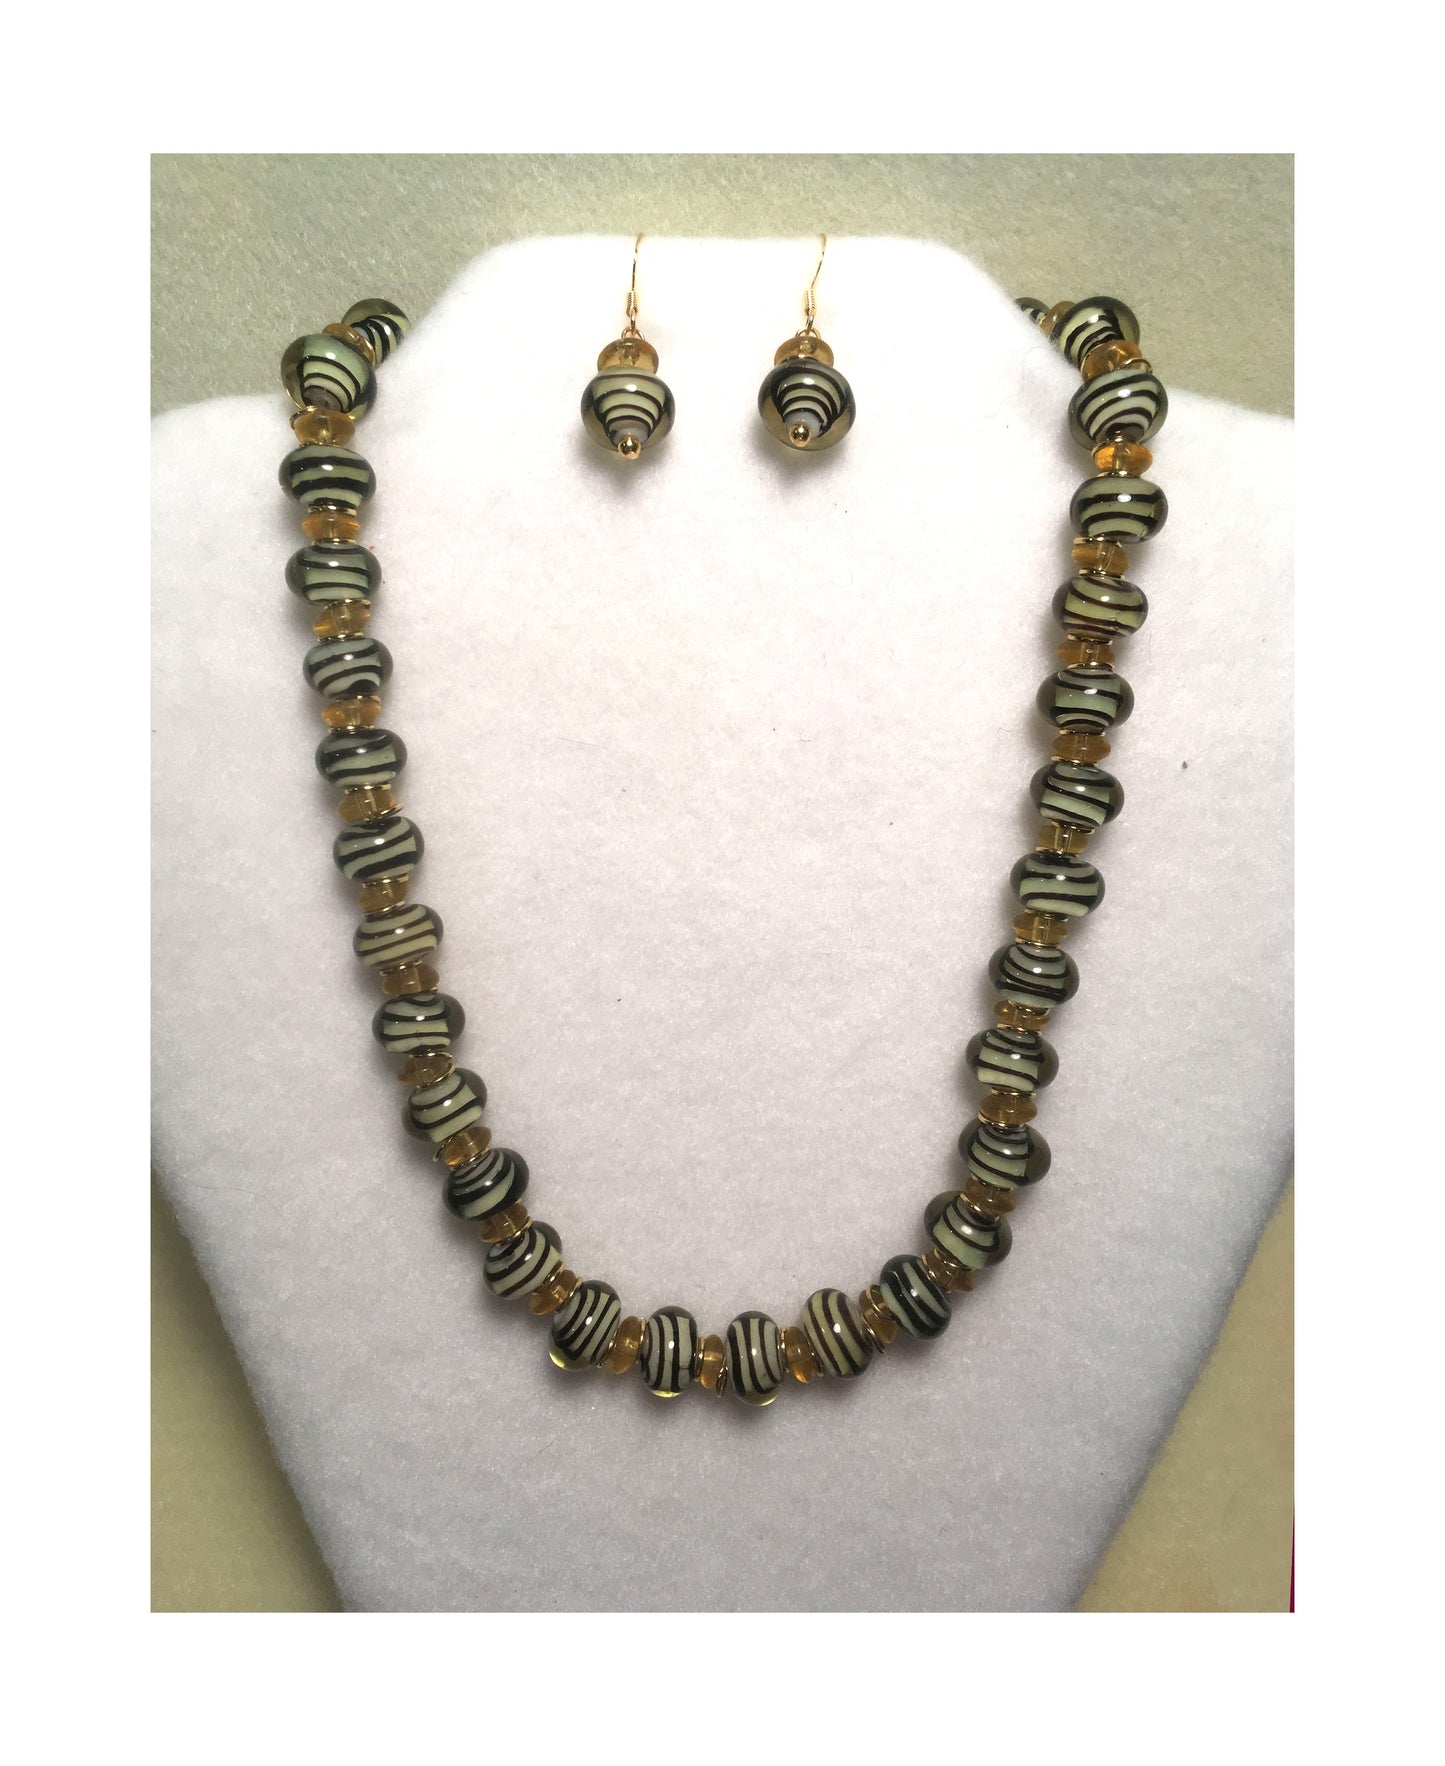 Black Swirls in Gold Glass Necklace and Earring Set